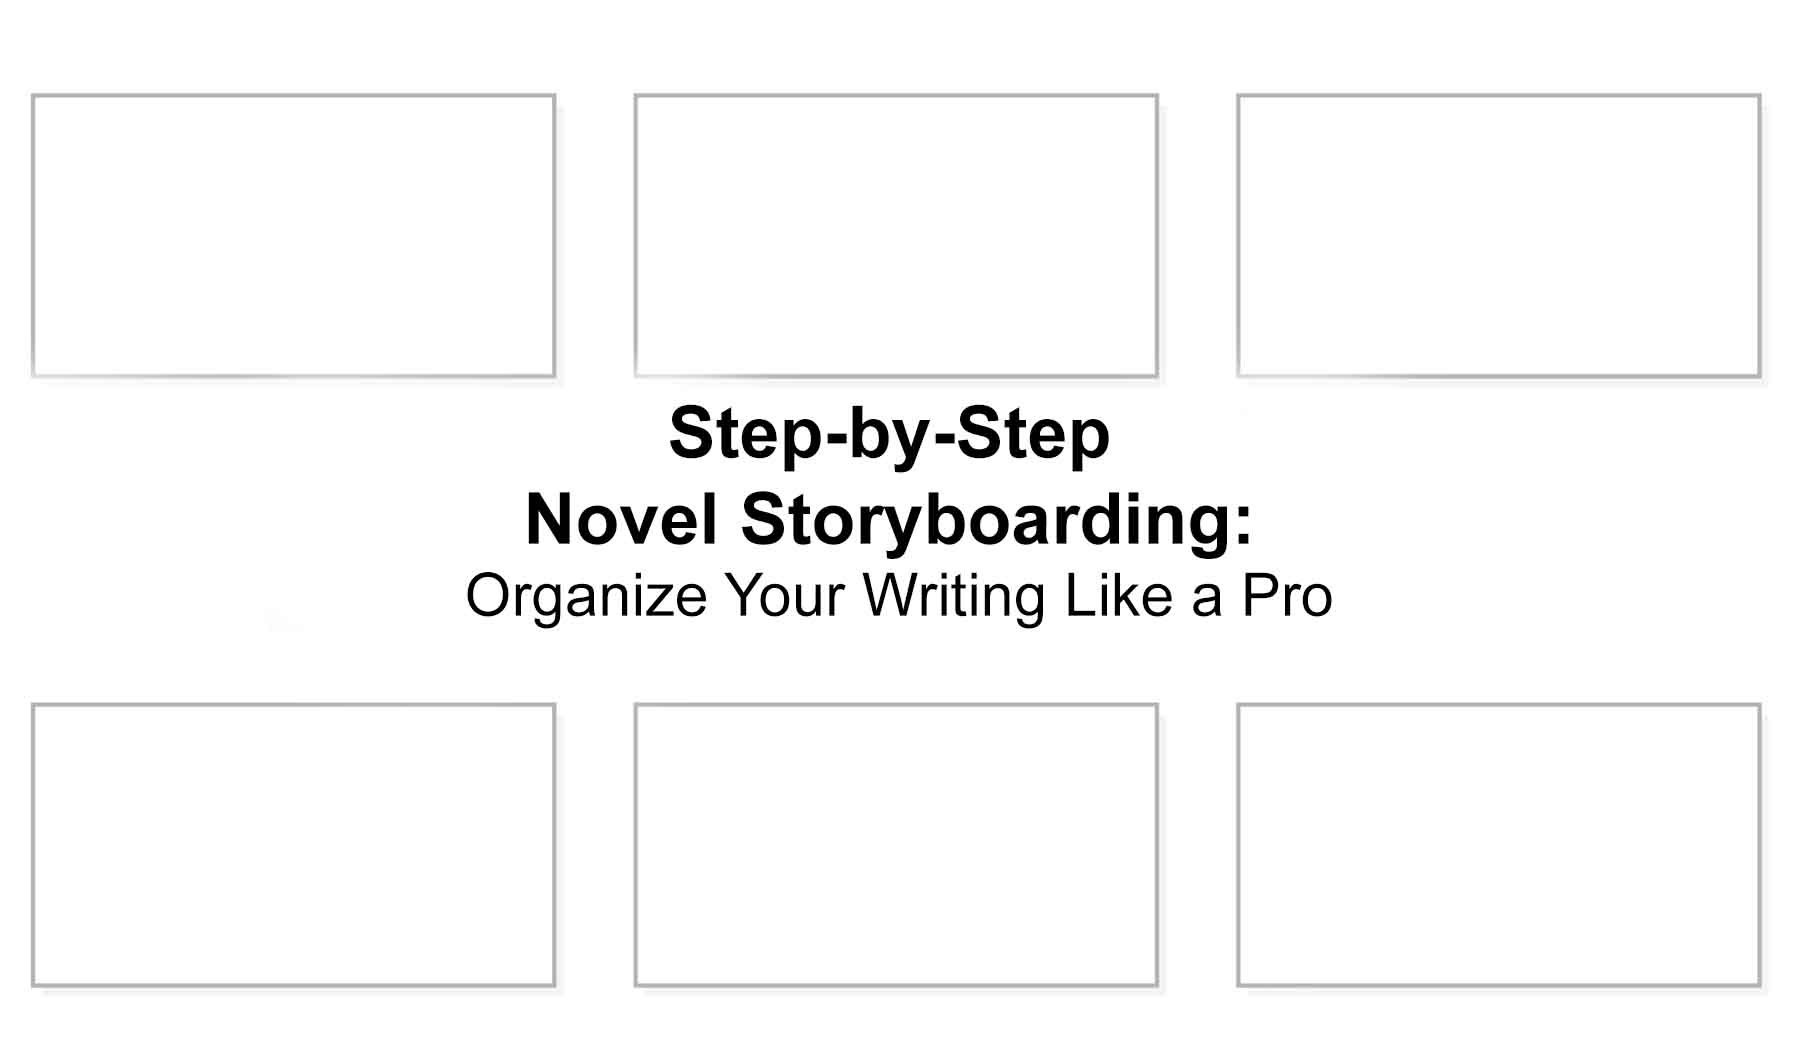 Step-by-Step Novel Storyboarding Organize Your Writing Like a Pro